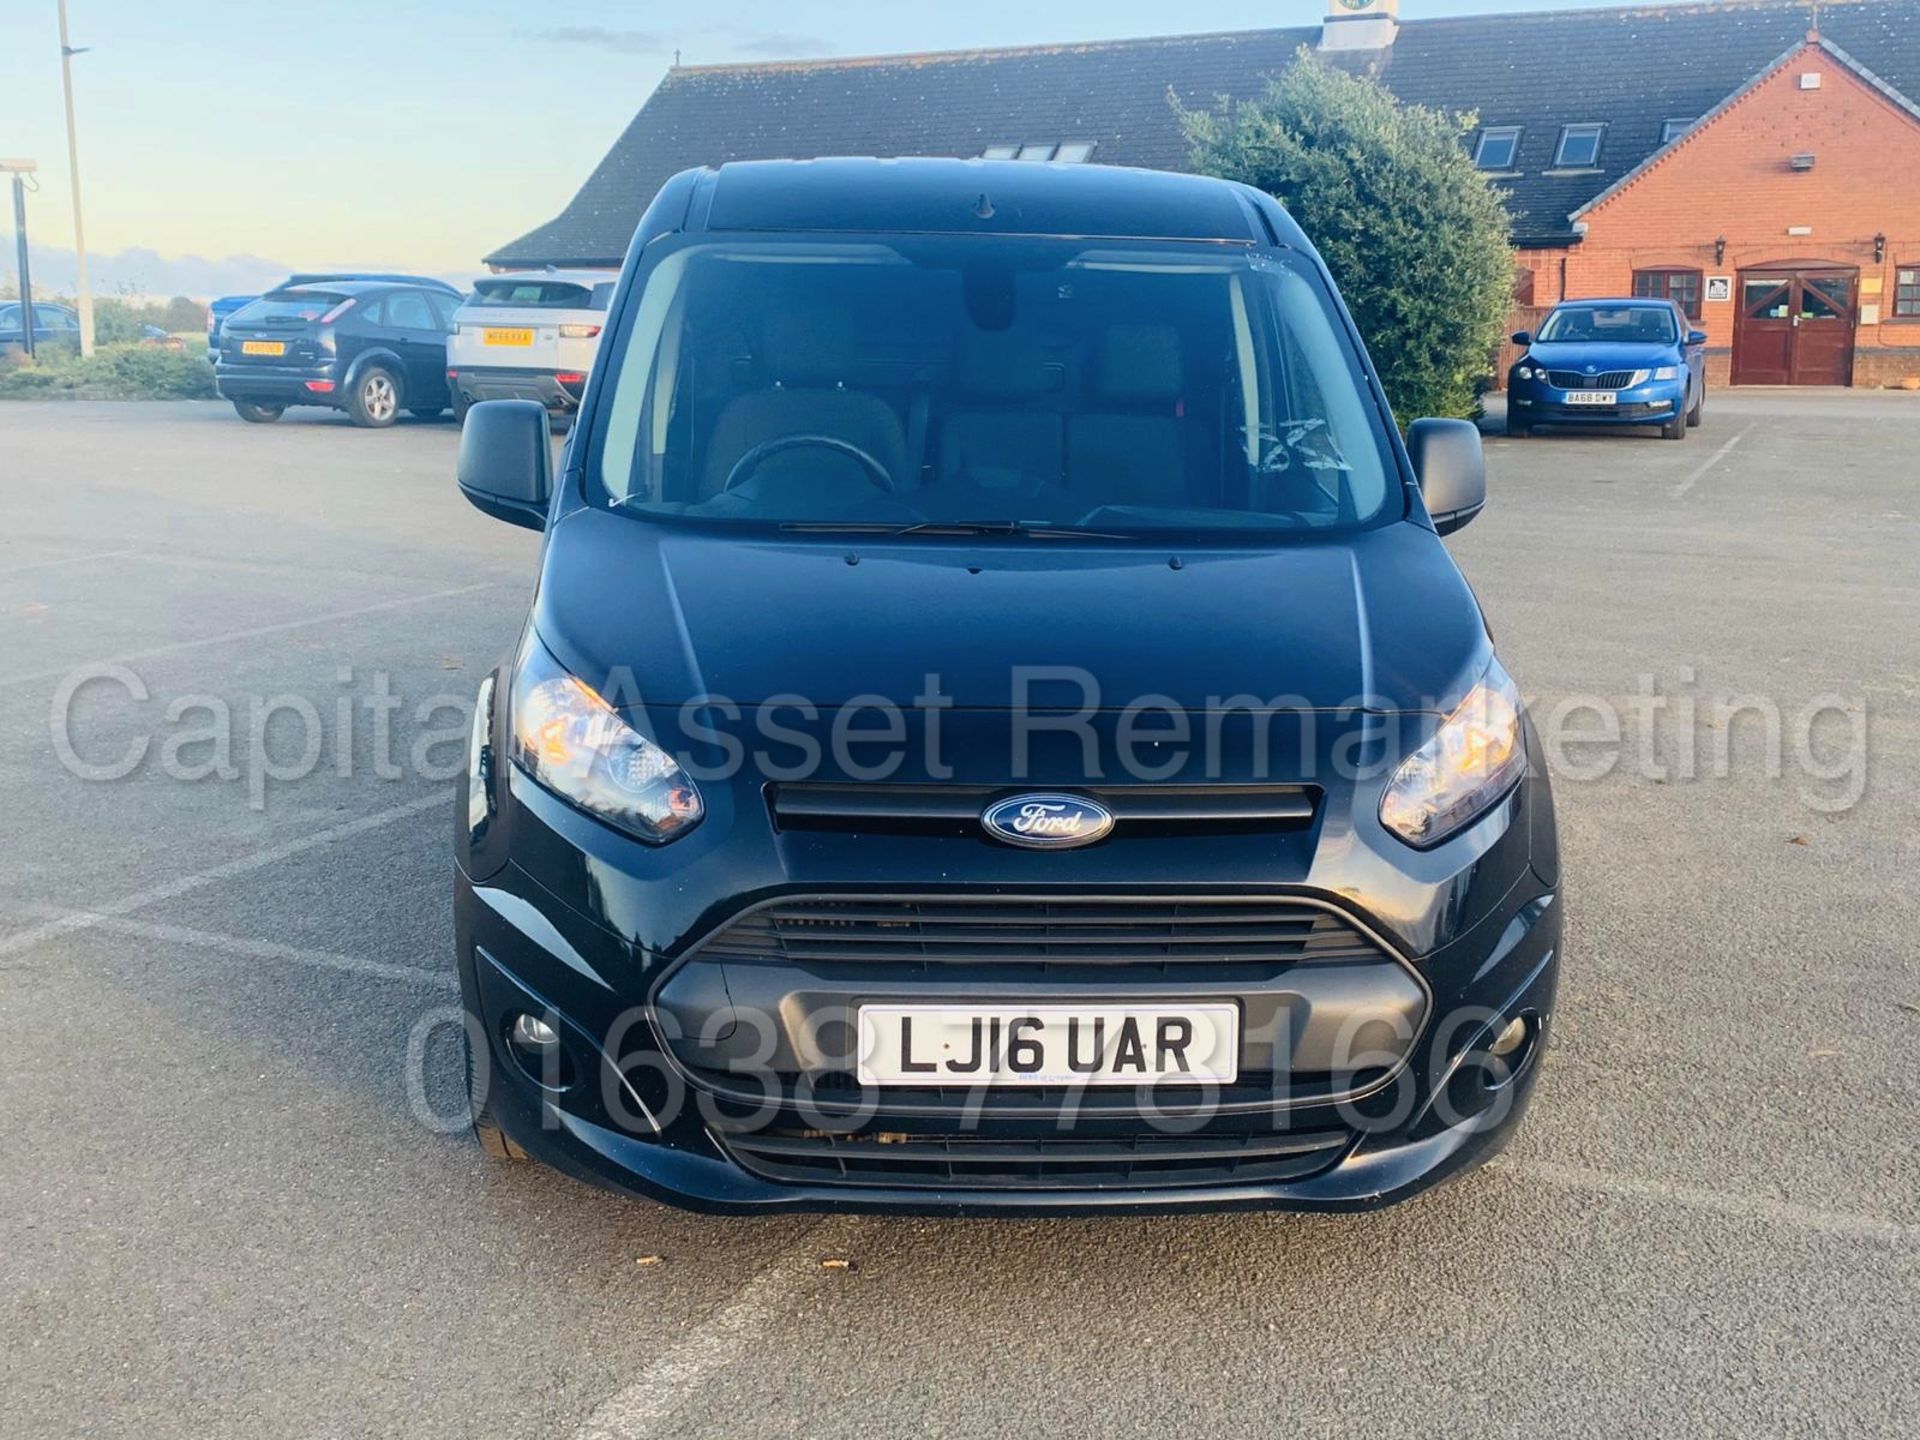 (ON SALE) FORD TRANSIT CONNECT *TREND EDITION* LWB (2016) '1.6 TDCI -95 BHP' **AIR CON** (3 SEATER) - Image 3 of 32